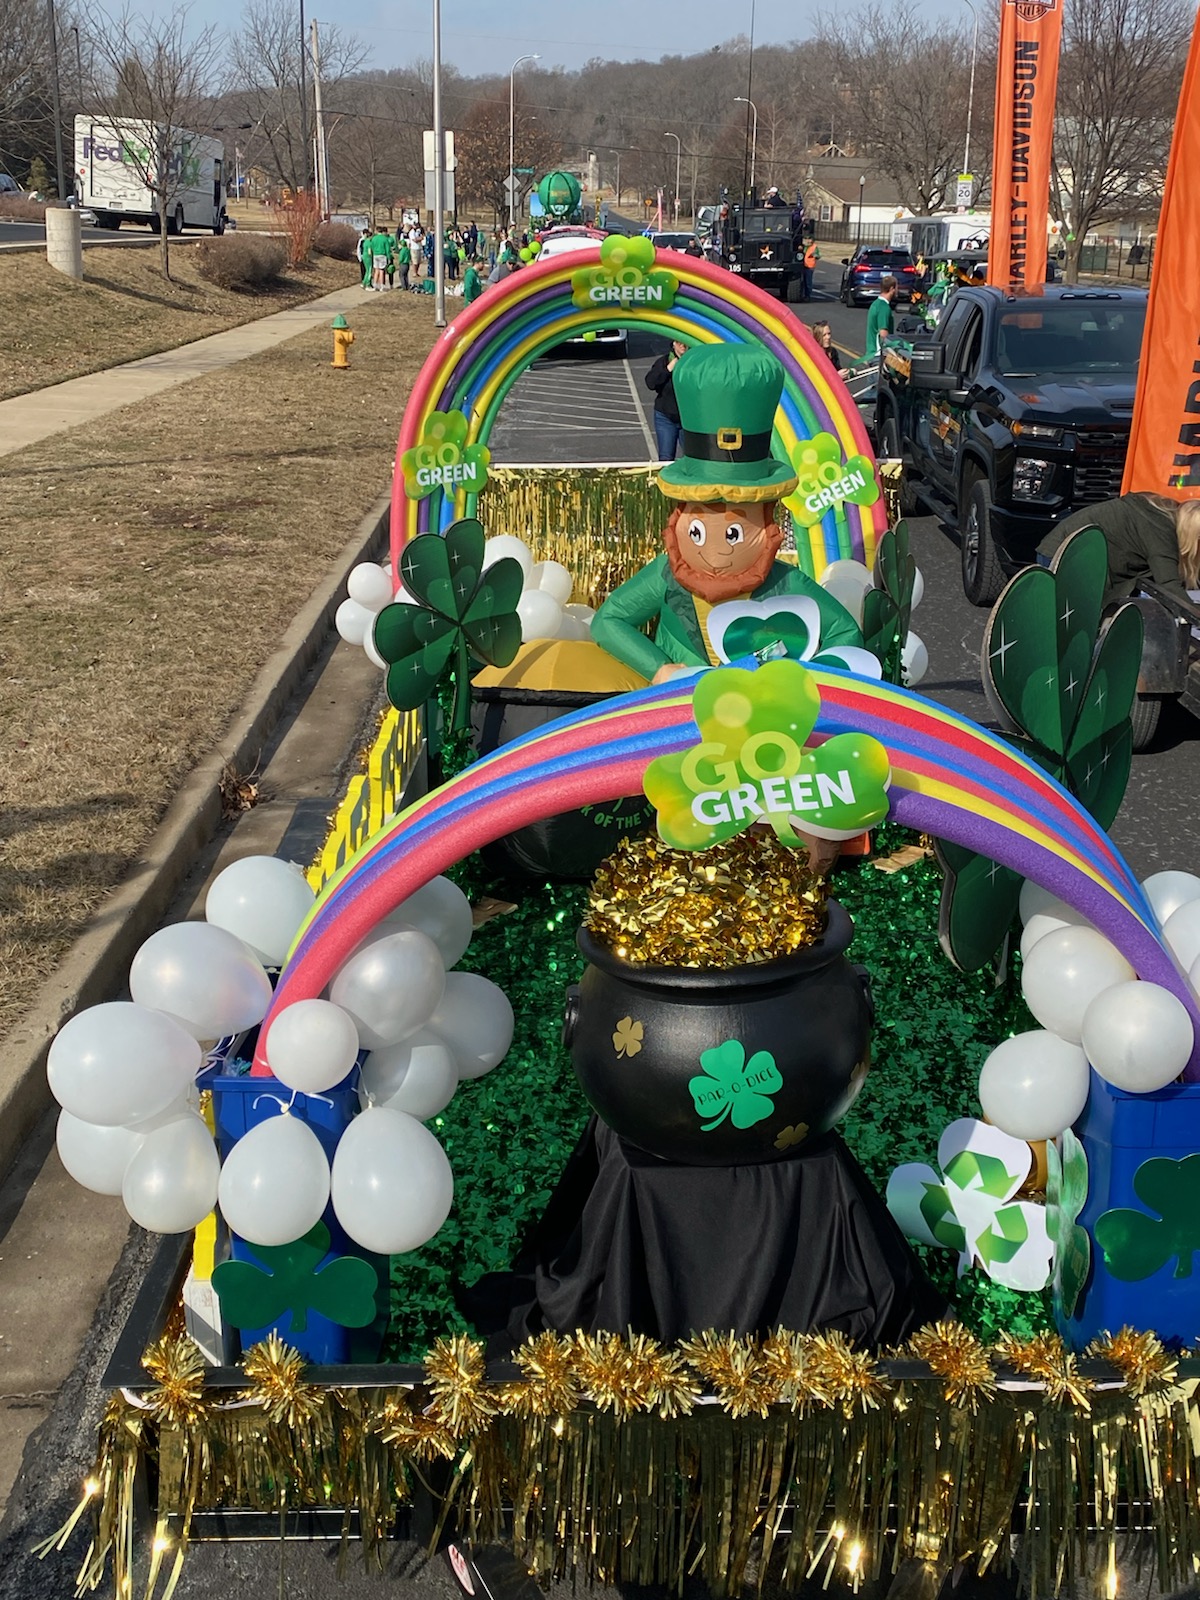 Par-A-Dice's recycling-themed float at the Peoria St. Patrick’s Day Parade